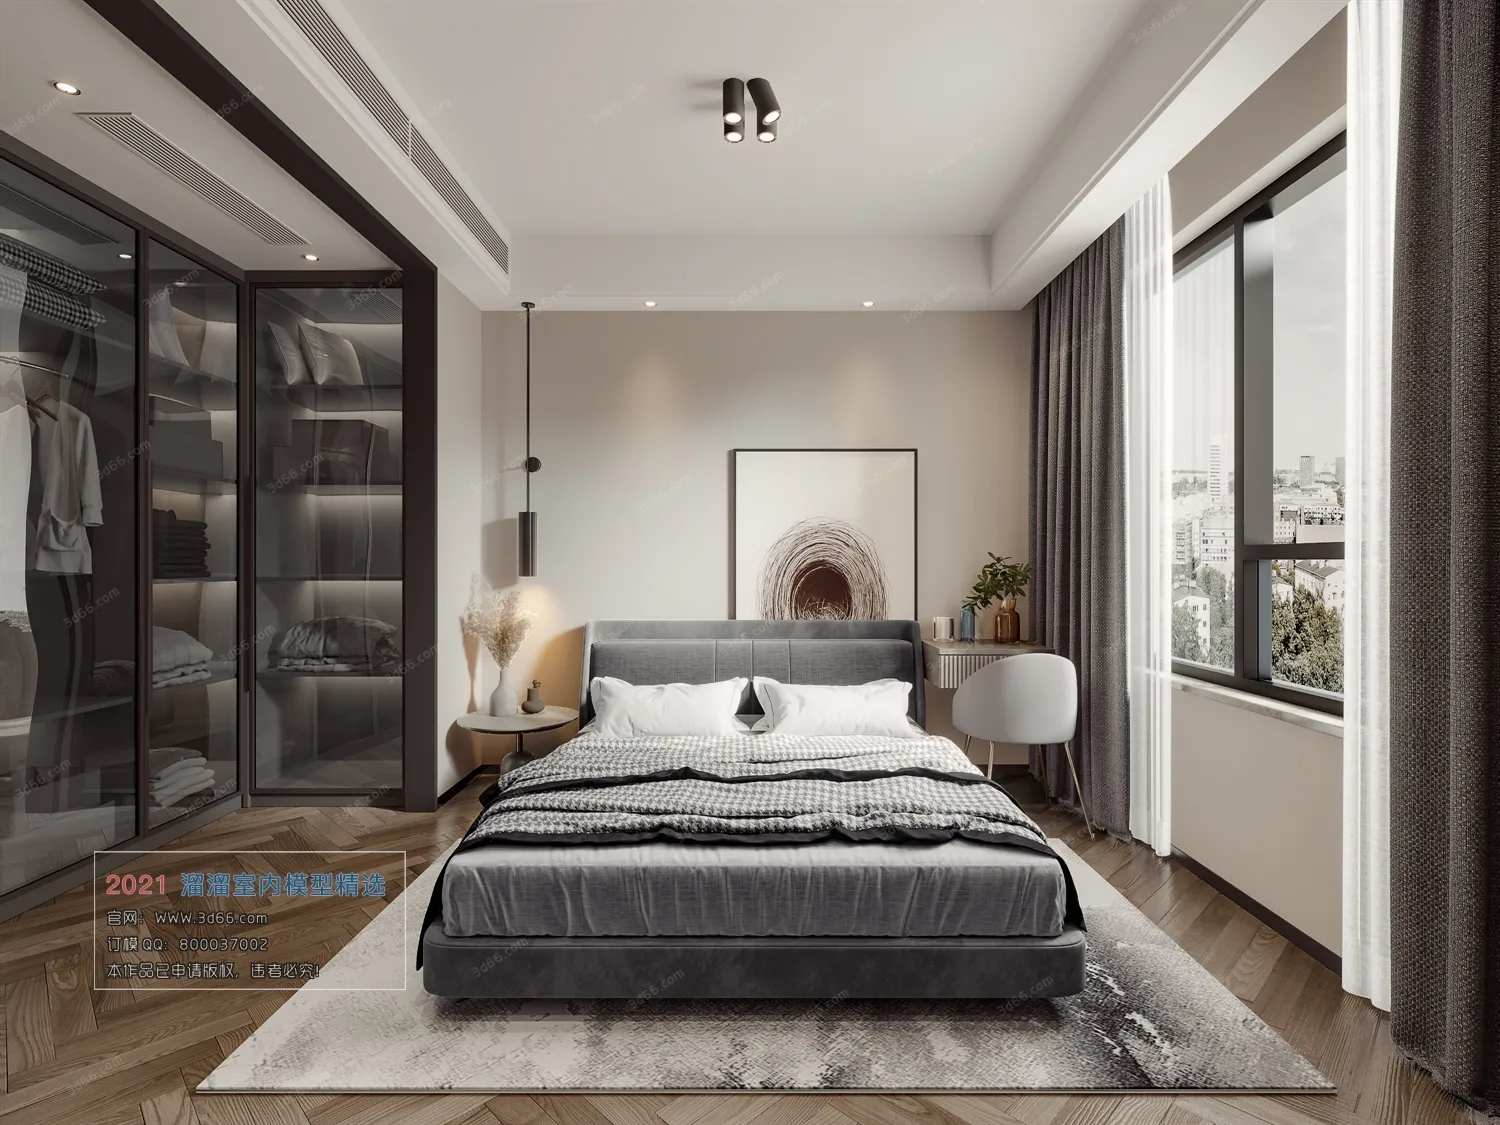 BEDROOM – A002-Modern style-Vray model